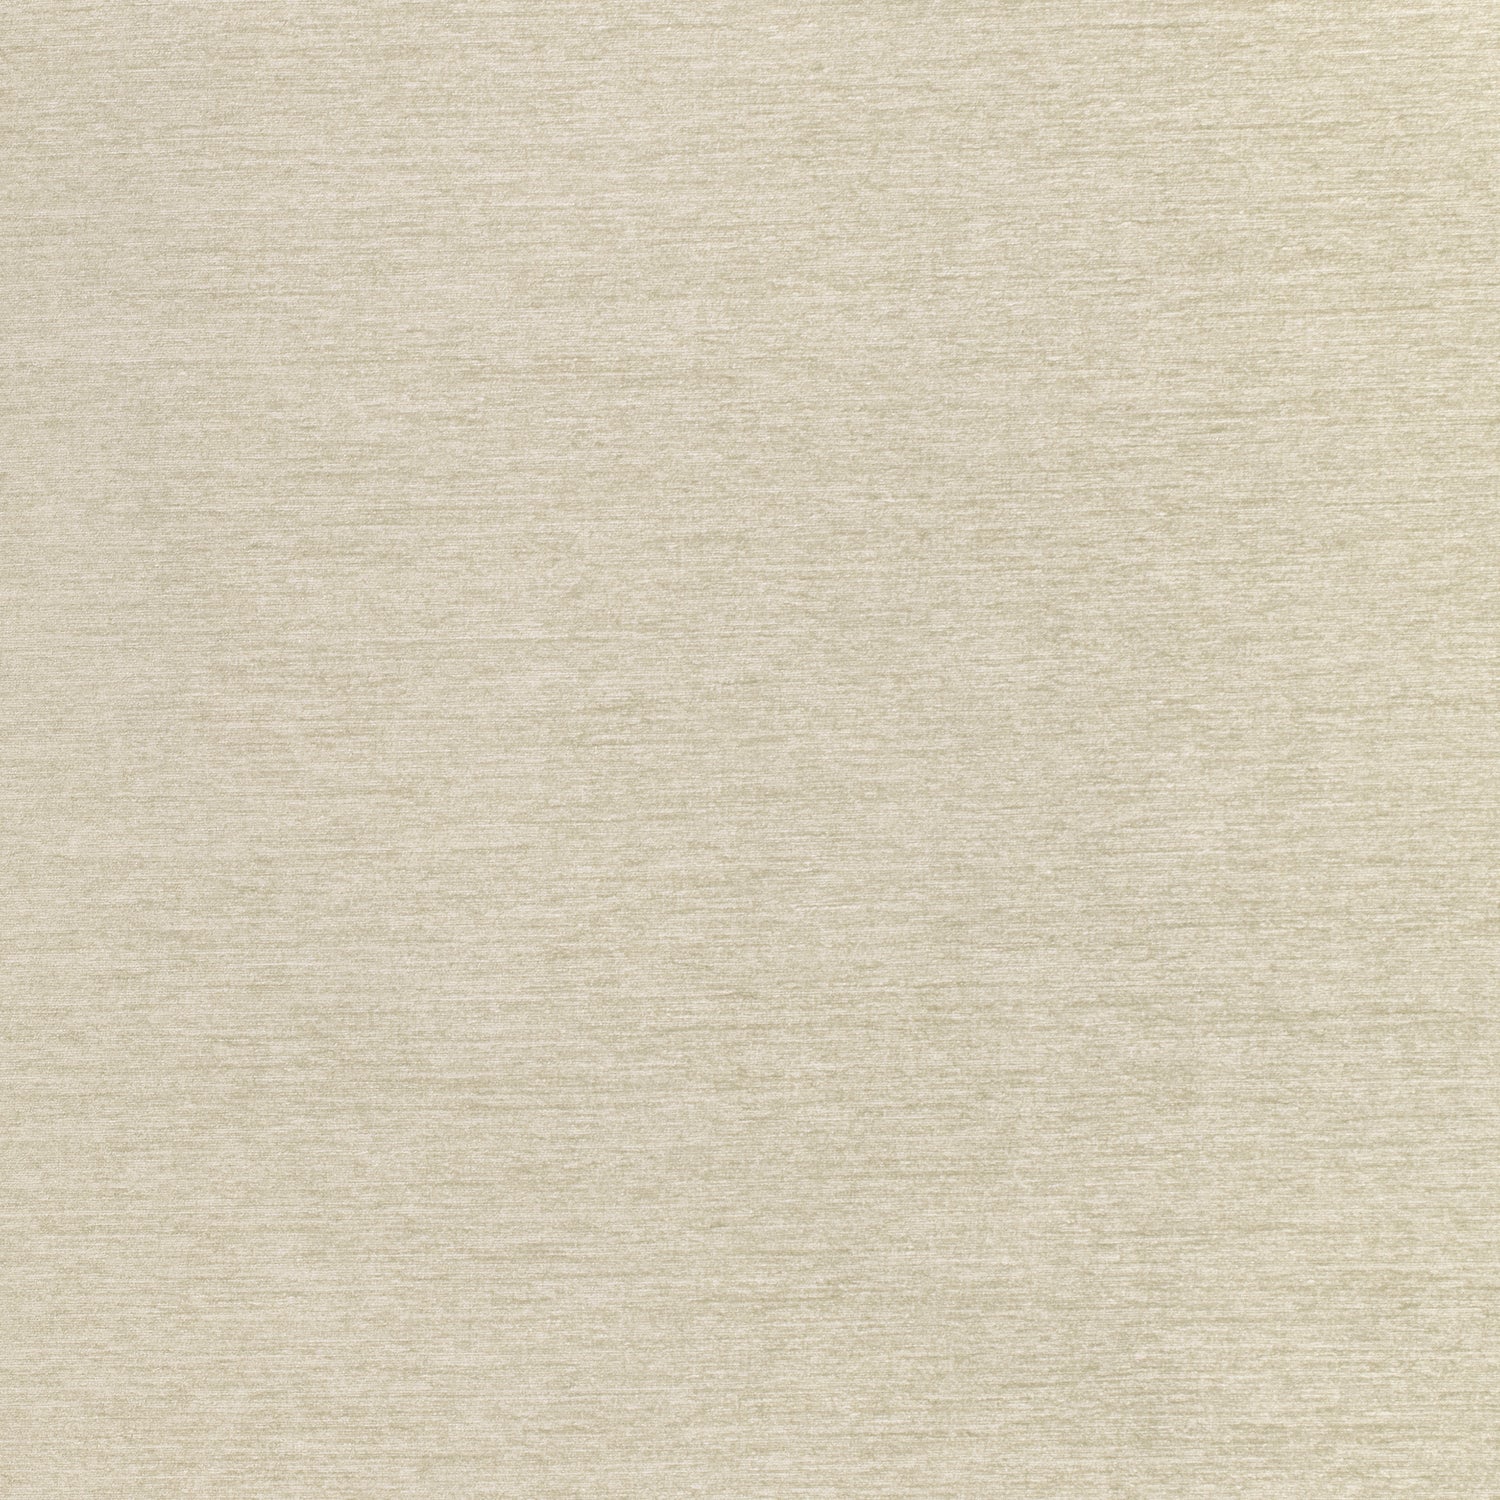 Annalise fabric in ivory color - pattern number W80465 - by Thibaut in the Mosaic collection